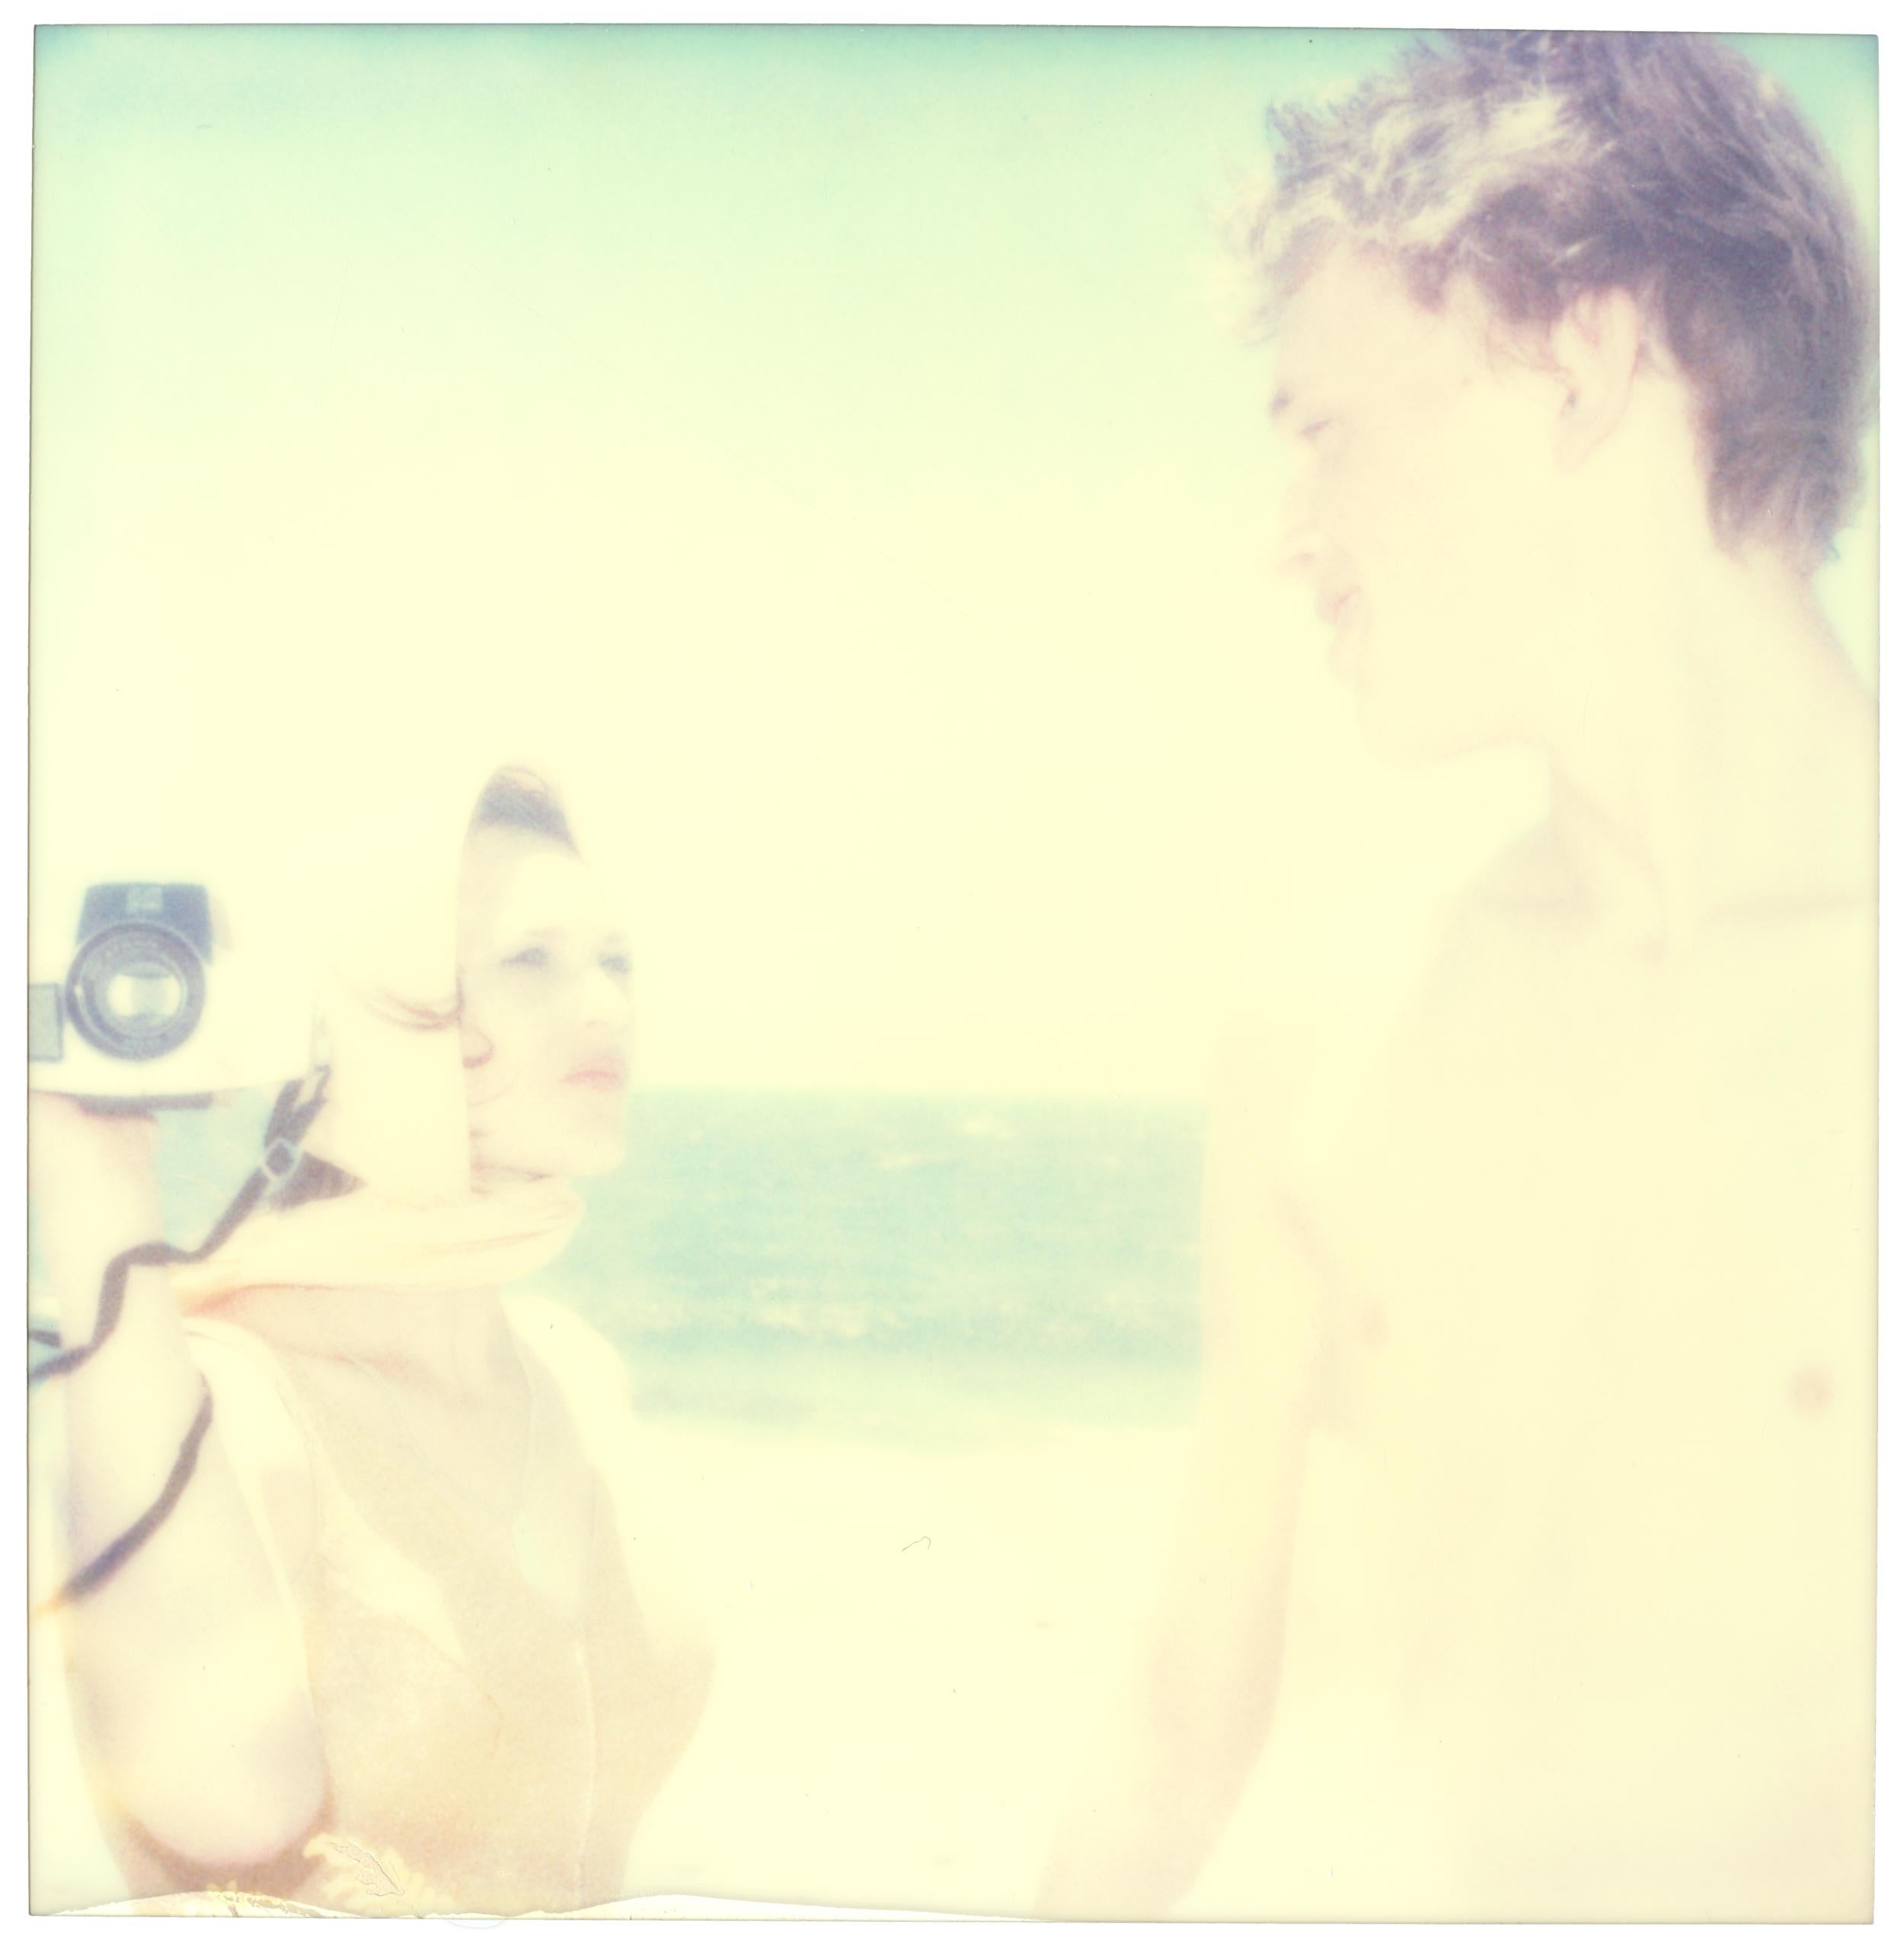 The Diva and the Boy (Beachshoot) - 9 pieces - Polaroid, Vintage, Contemporary - Beige Color Photograph by Stefanie Schneider